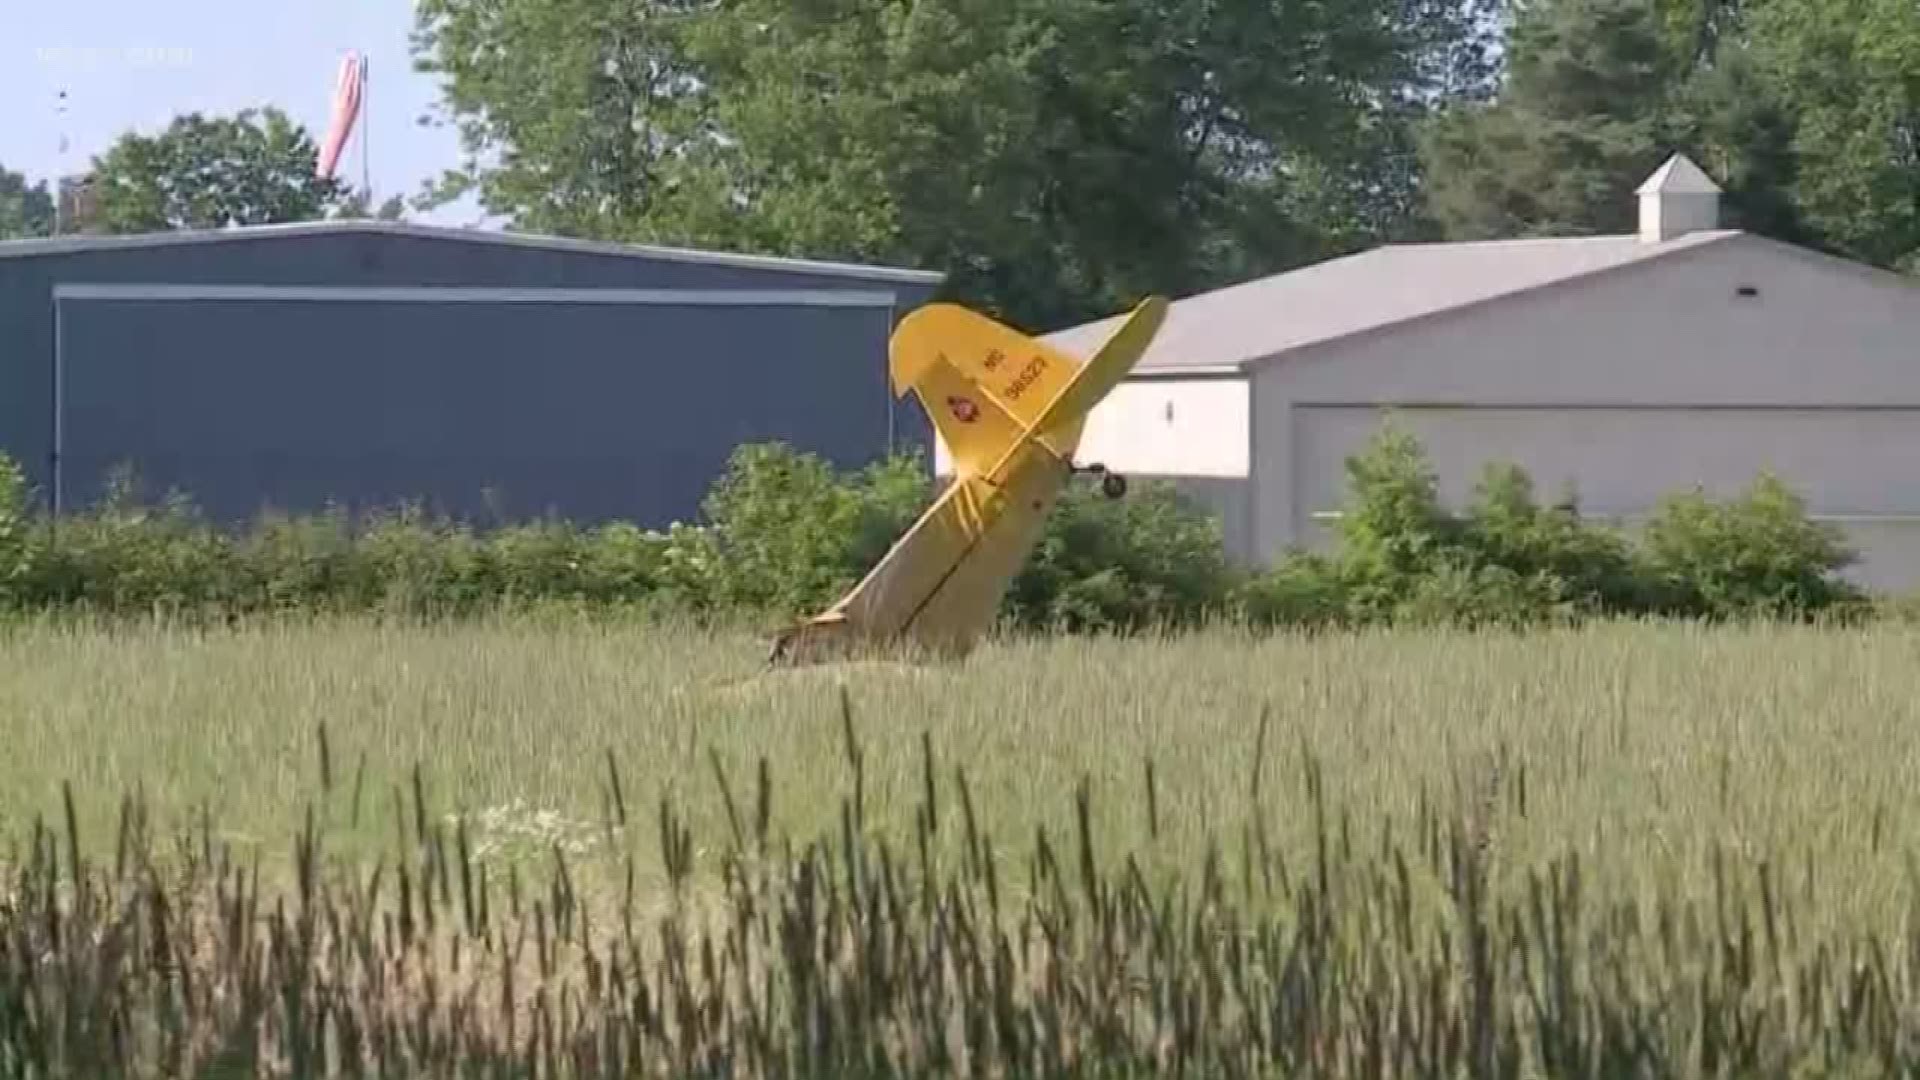 1 dead after plane crash in Lorain County